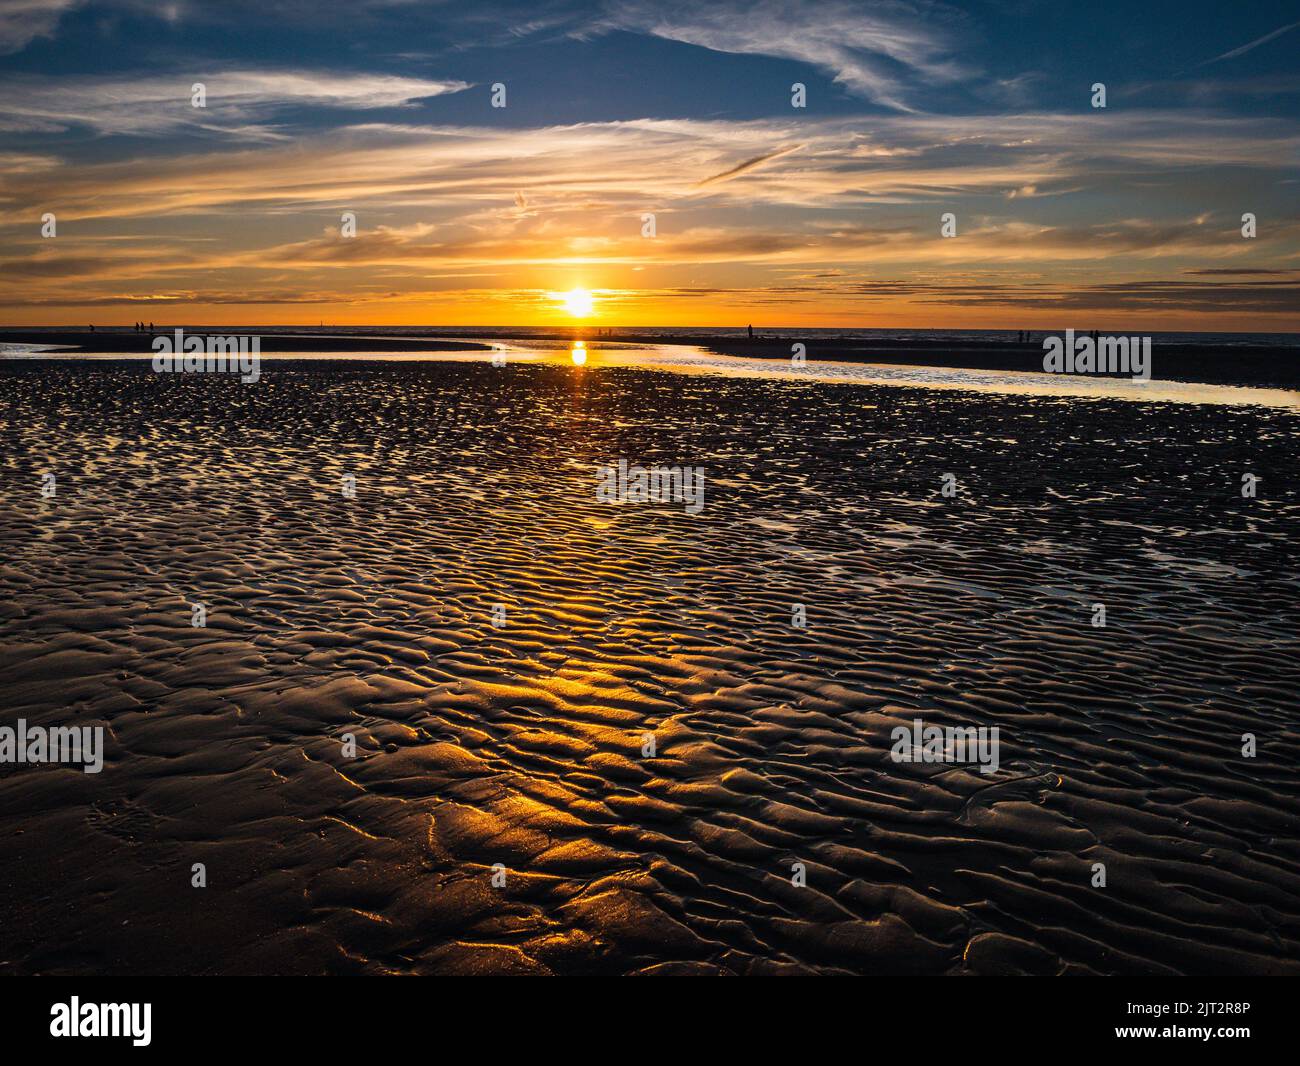 Ripples in the sand at low tide during dramatic sunset Stock Photo